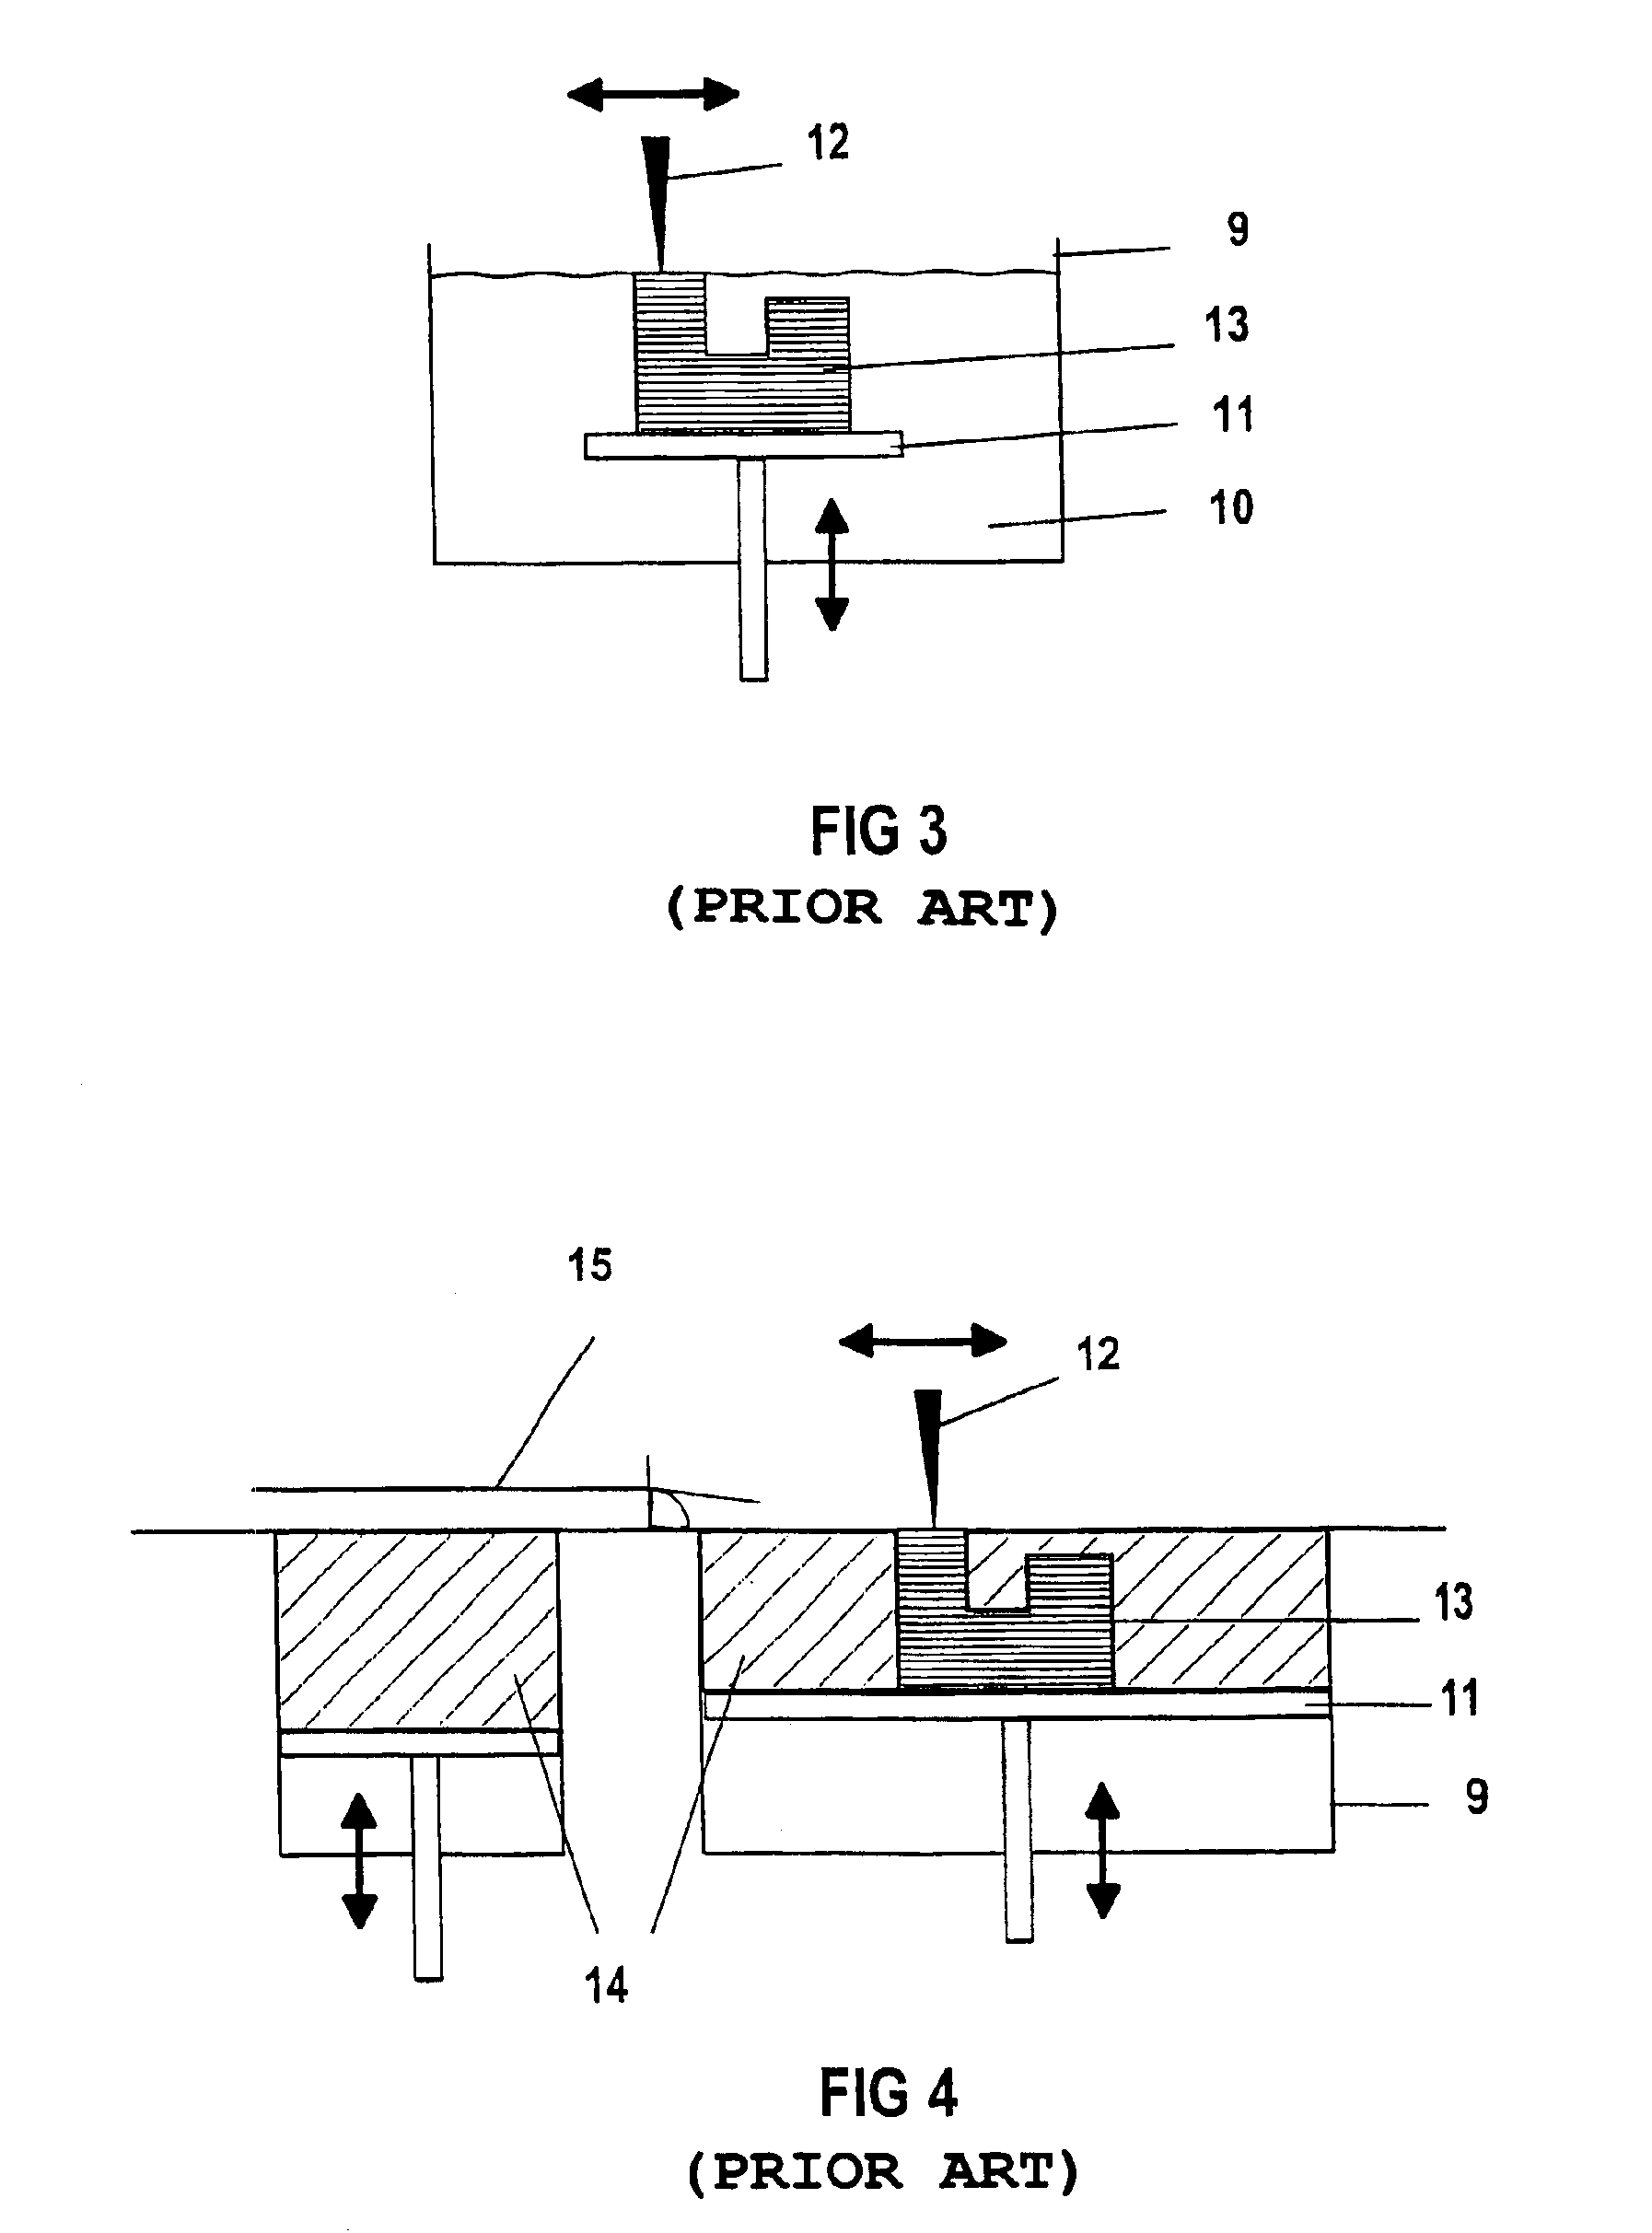 Method for producing a scattered radiation grid or collimator